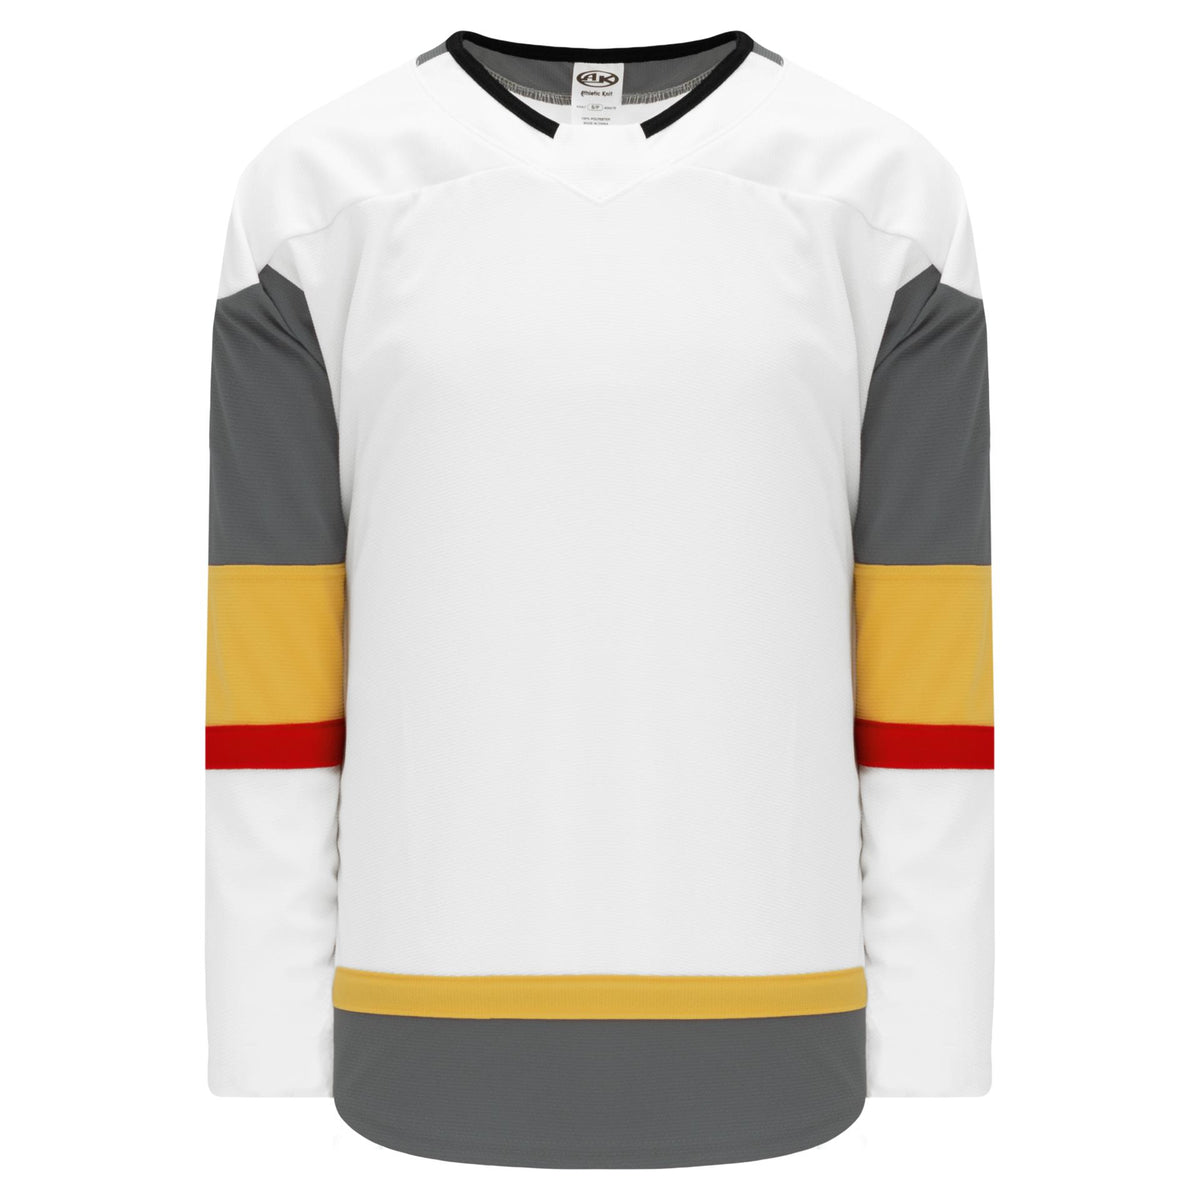 Athletic Knit (AK) H550BY-LAV625B Youth 2021 Las Vegas Golden Knights Third Gold Hockey Jersey X-Large